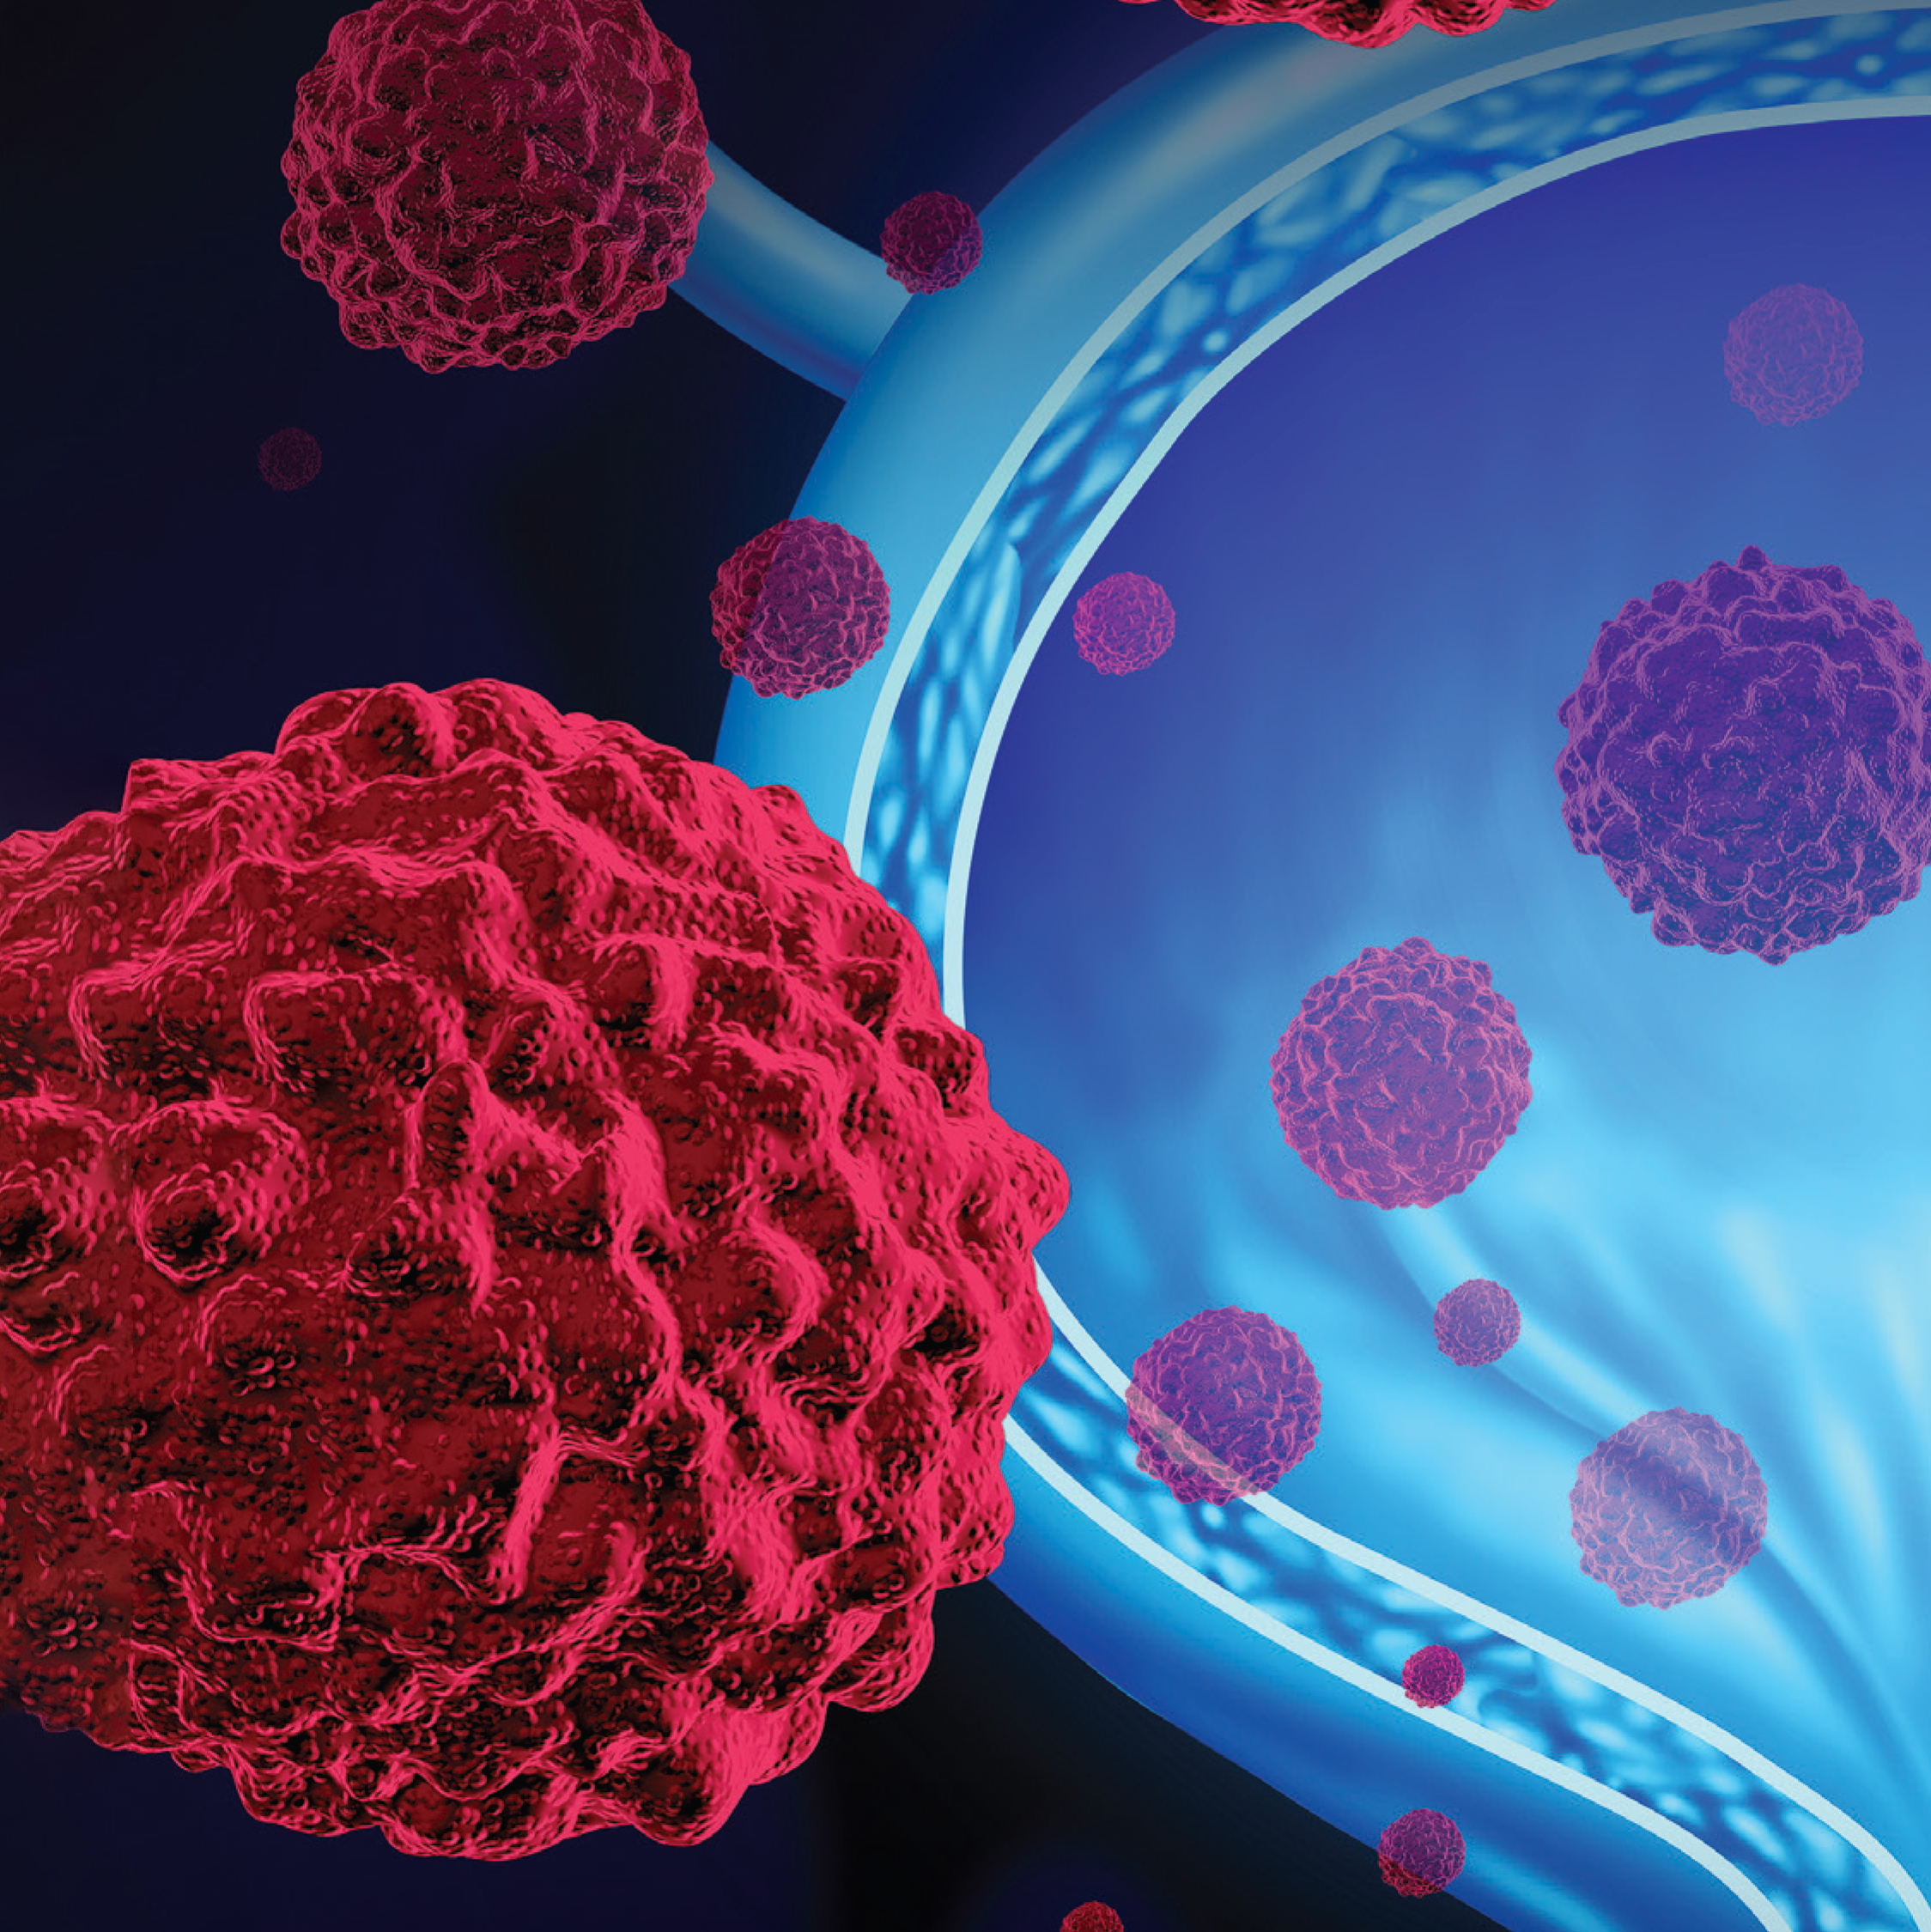 "These findings suggest that first-line atezolizumab monotherapy could be a potential treatment option for patients with locally advanced or metastatic urothelial cancer ineligible for cisplatin who have high PD-L1 expression," according to the study authors.